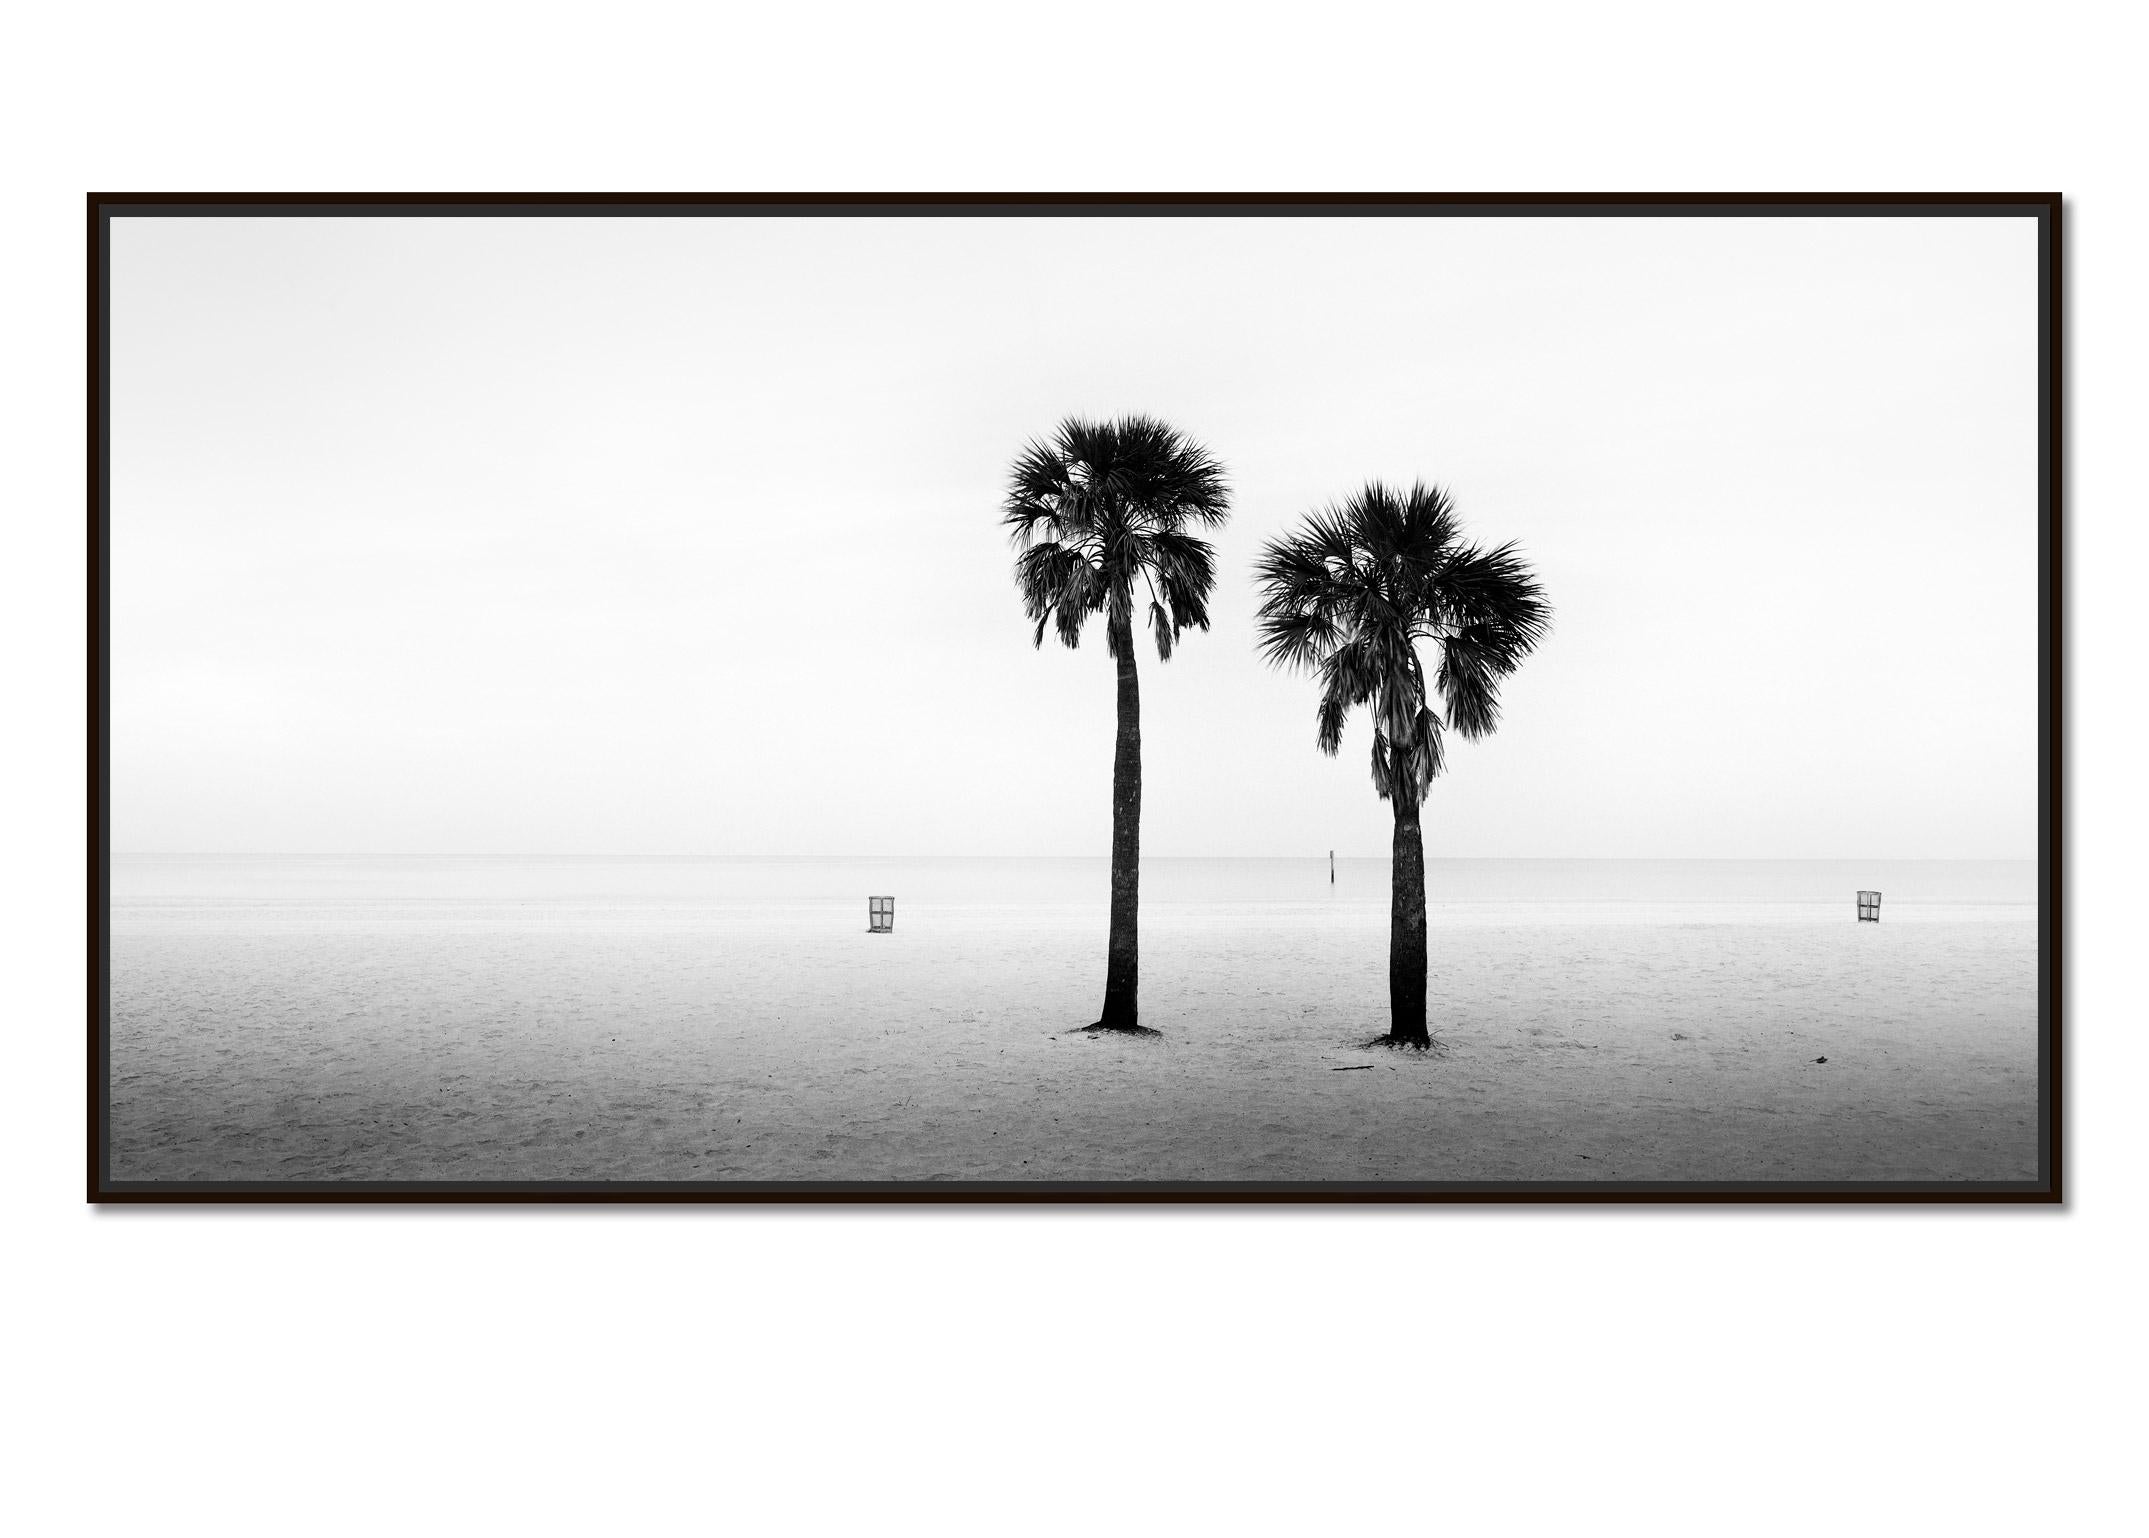 Two Palms, deserted beach, Florida, USA, Black and White landscape photography - Photograph by Gerald Berghammer